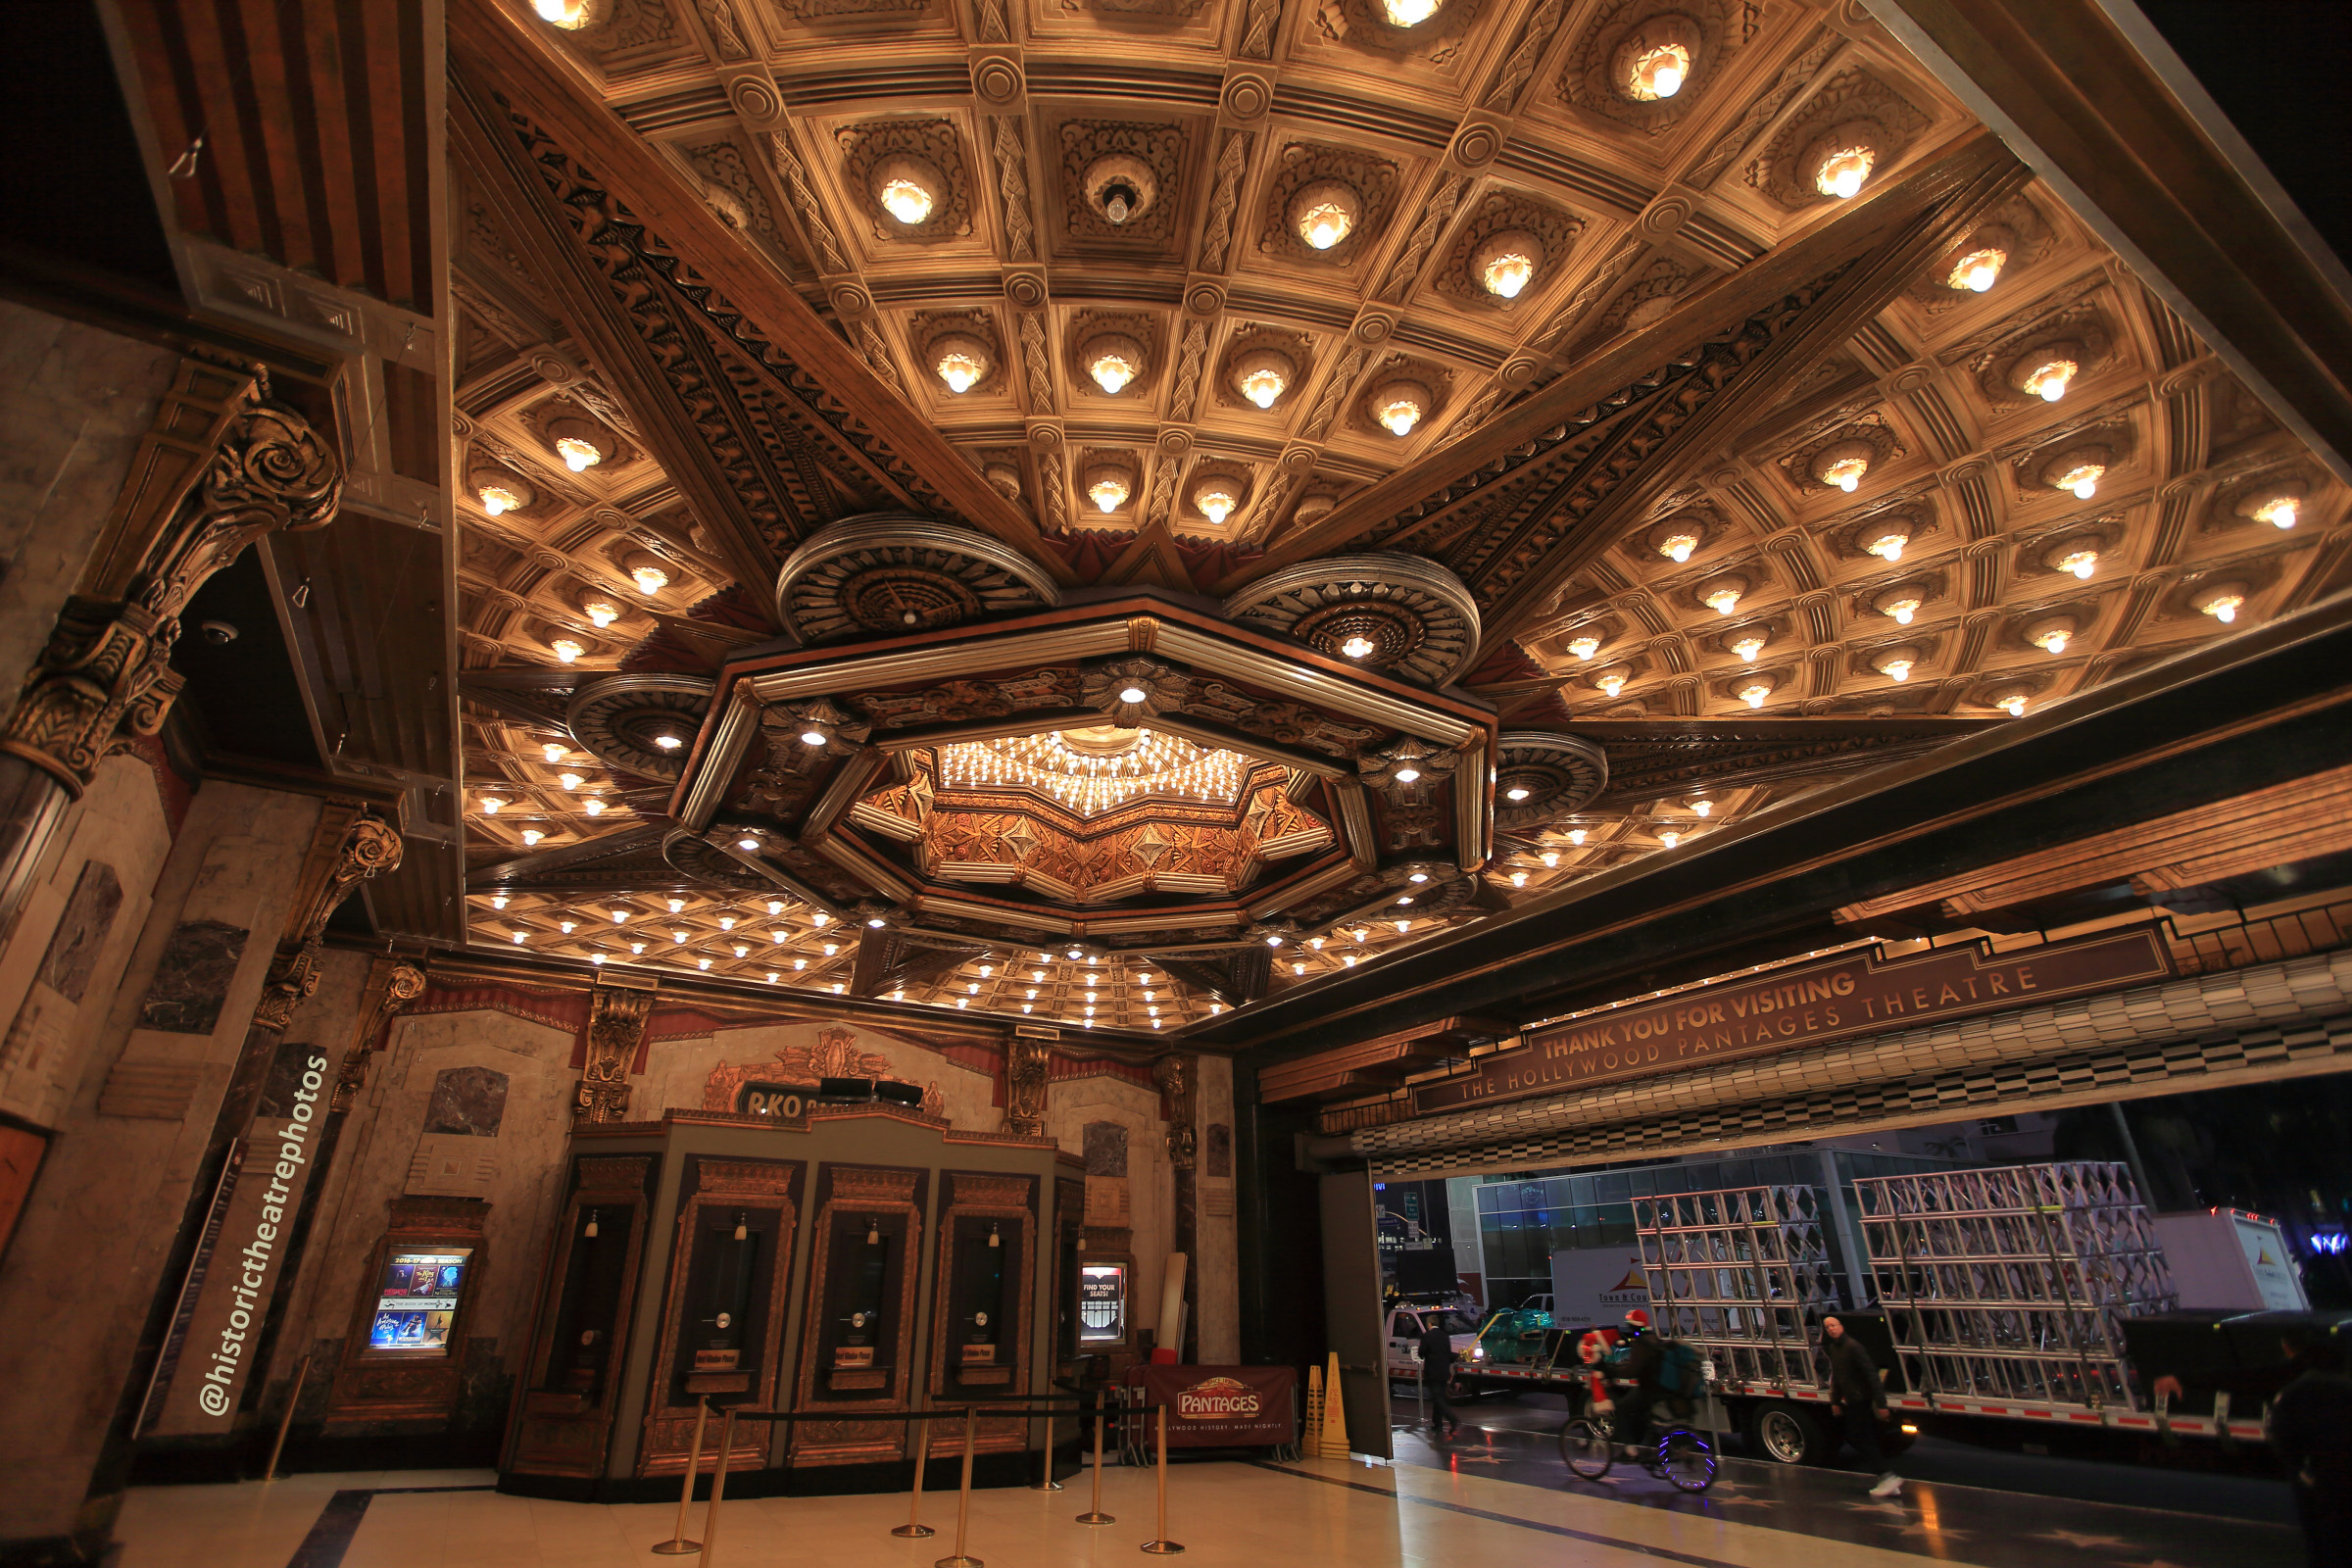 Pantages Theatre, Hollywood: Exterior/Ticket Lobby with Box Office on right